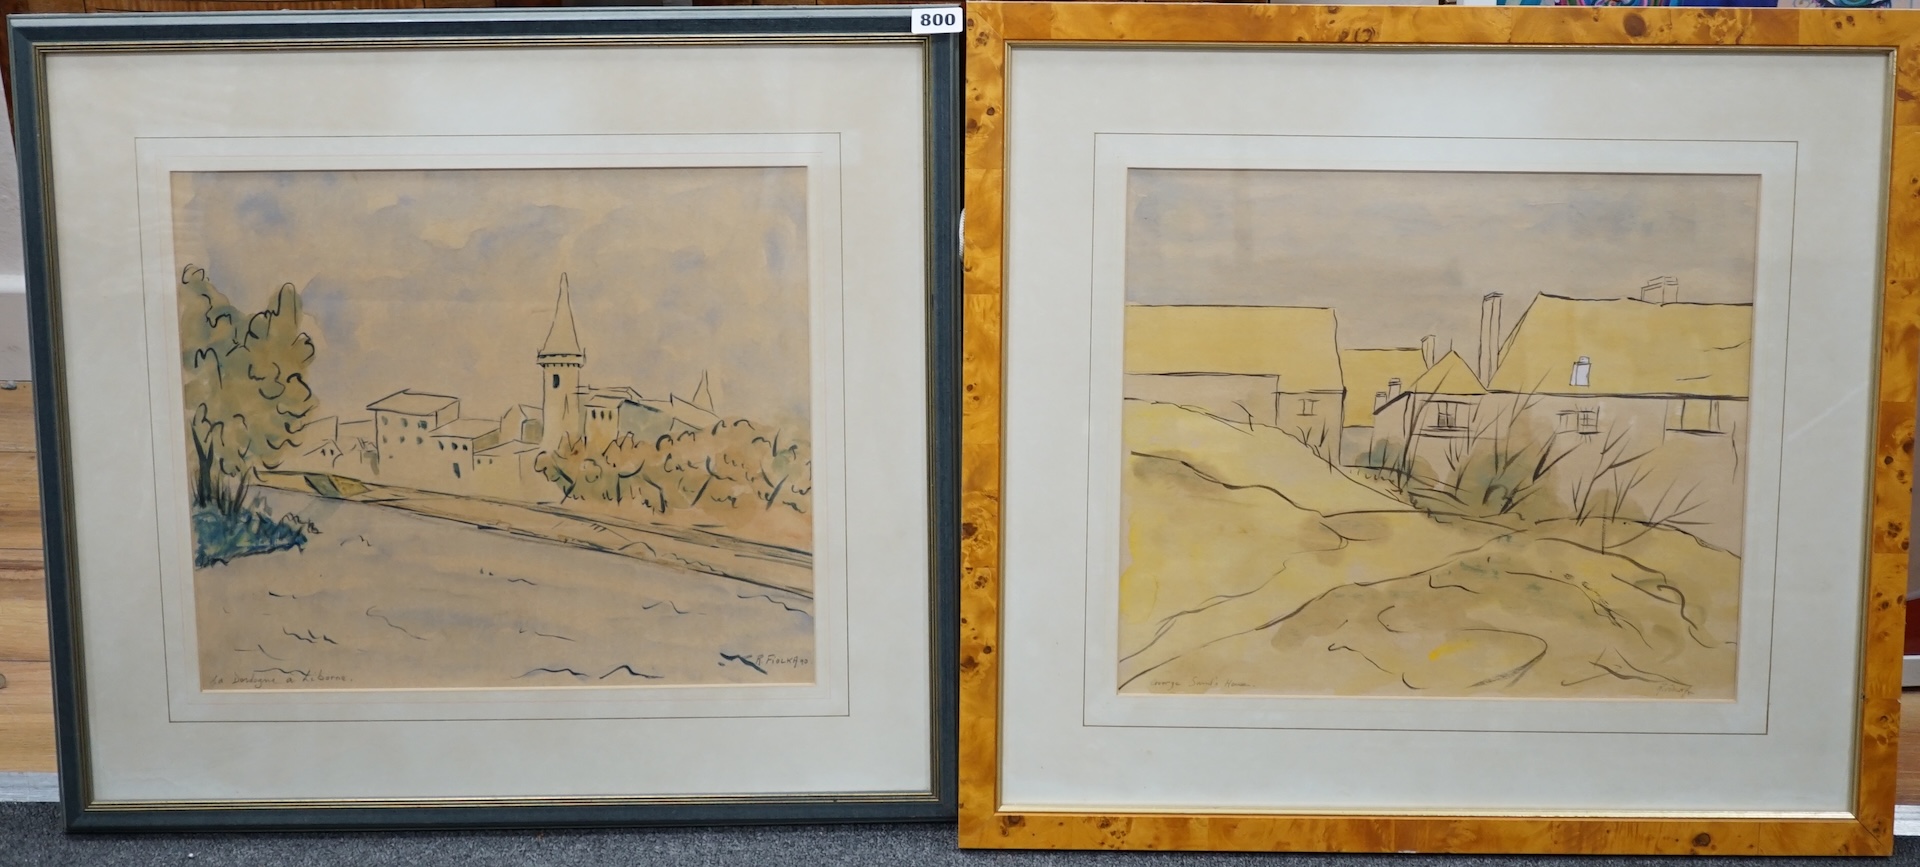 R. Fiolka, two ink and watercolours, 'George Sands’ House', signed and dated ‘90 and 'La Dordogne à Liborne', signed and dated ’90, largest 34 x 39cm. Condition - fair to good, some discolouration